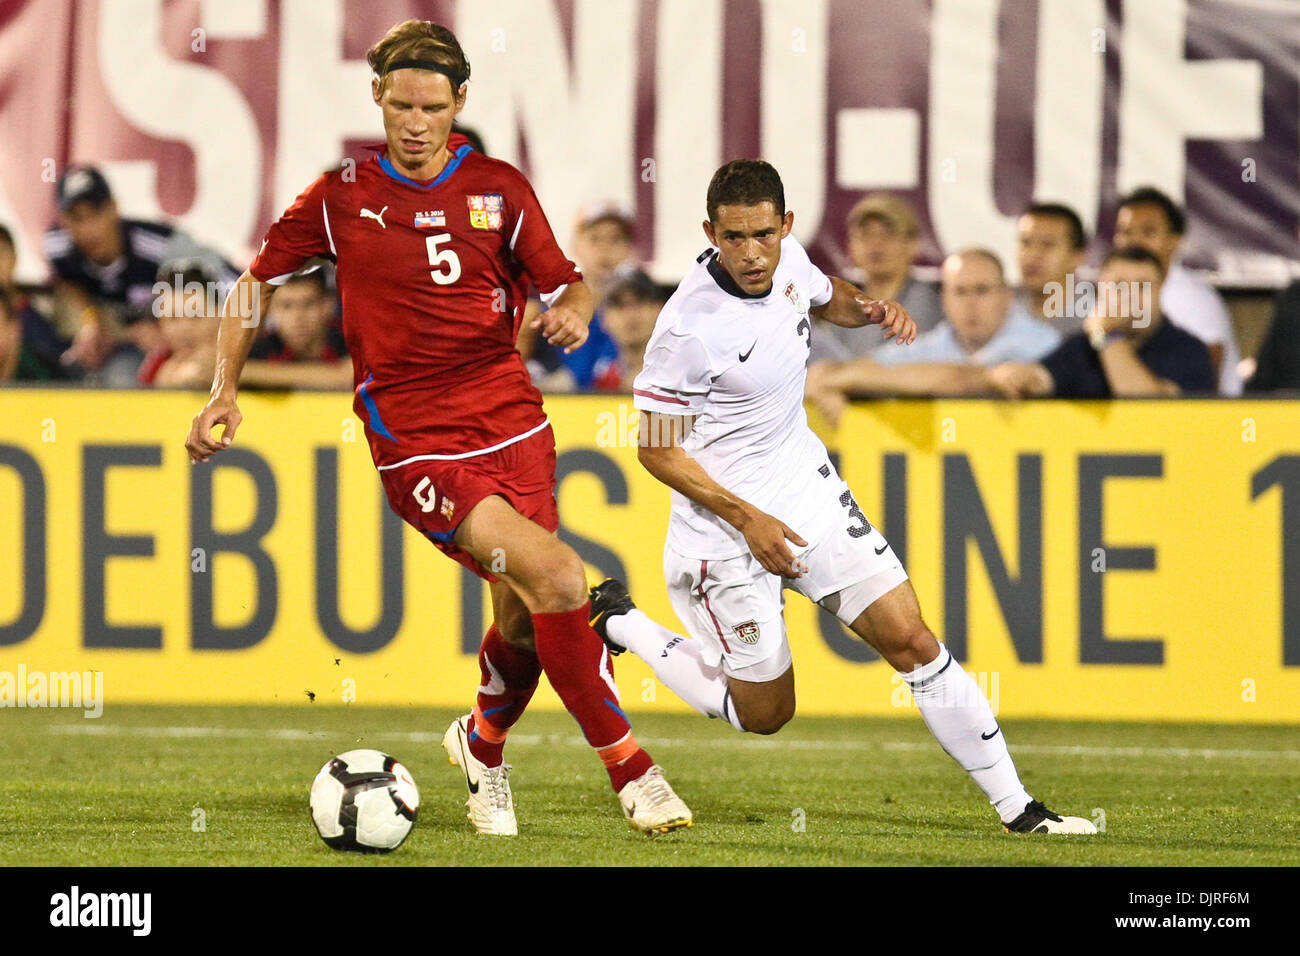 May 25, 2010 - East Hartford, Connecticut, U.S - 25 May 2010: FIFA World  Cup. Czech Republic defender Jan Rajnoch (5) drives the ball past United  States forward Herculez Gomez (30) during